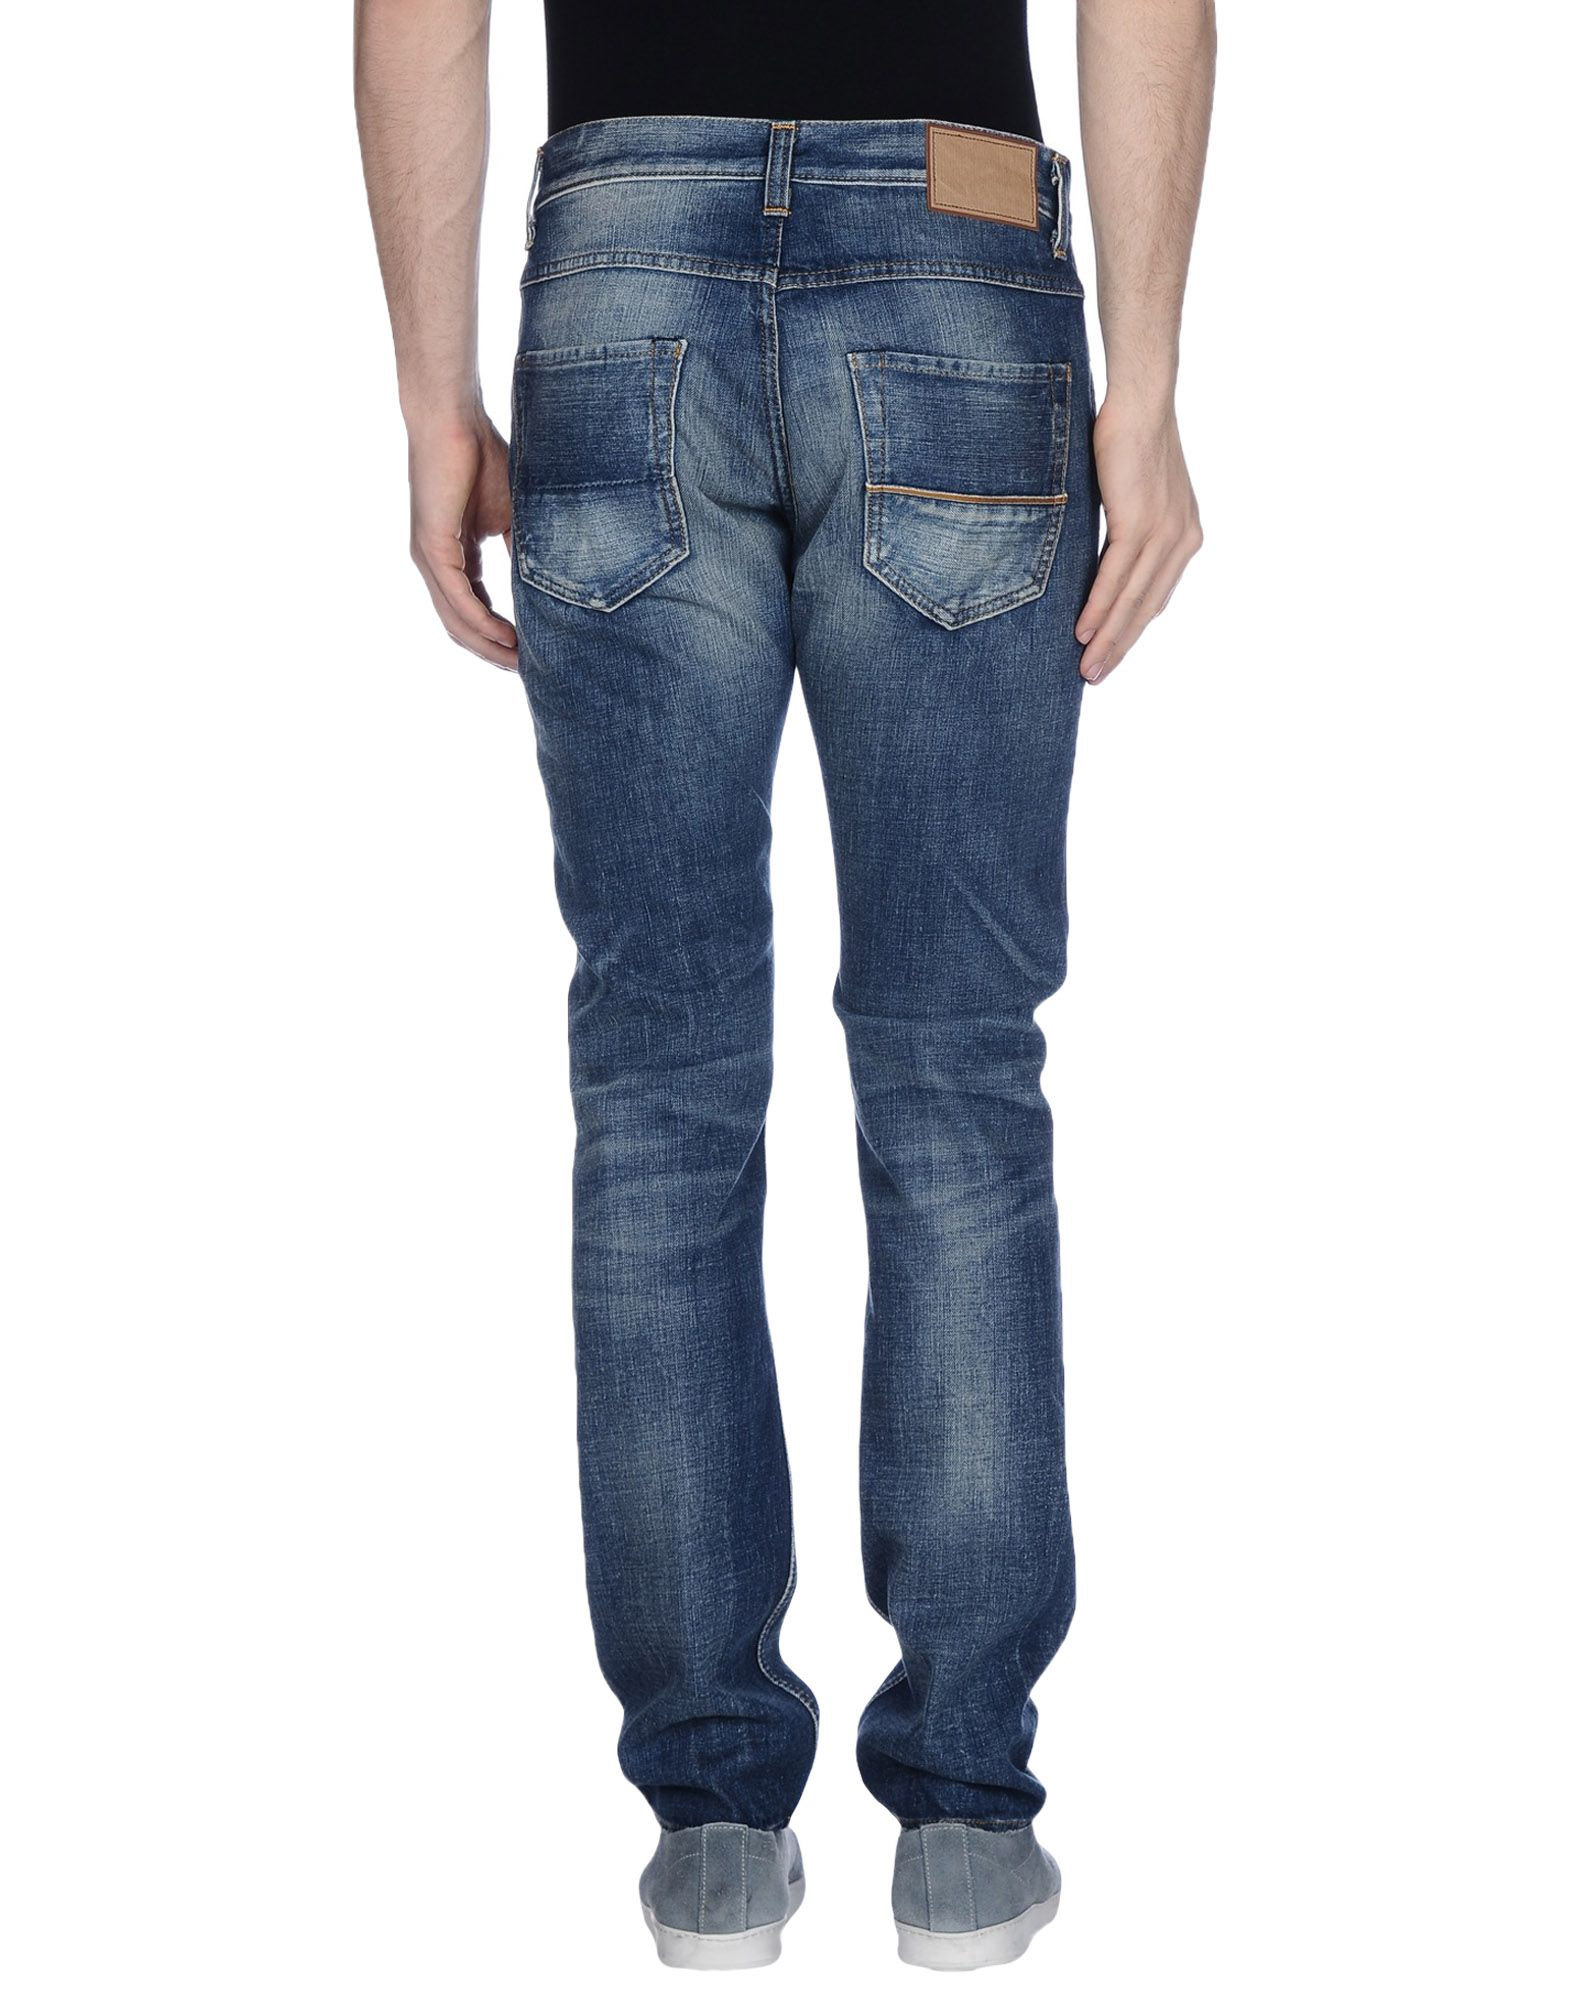 Lyst - Care Label Denim Trousers in Blue for Men